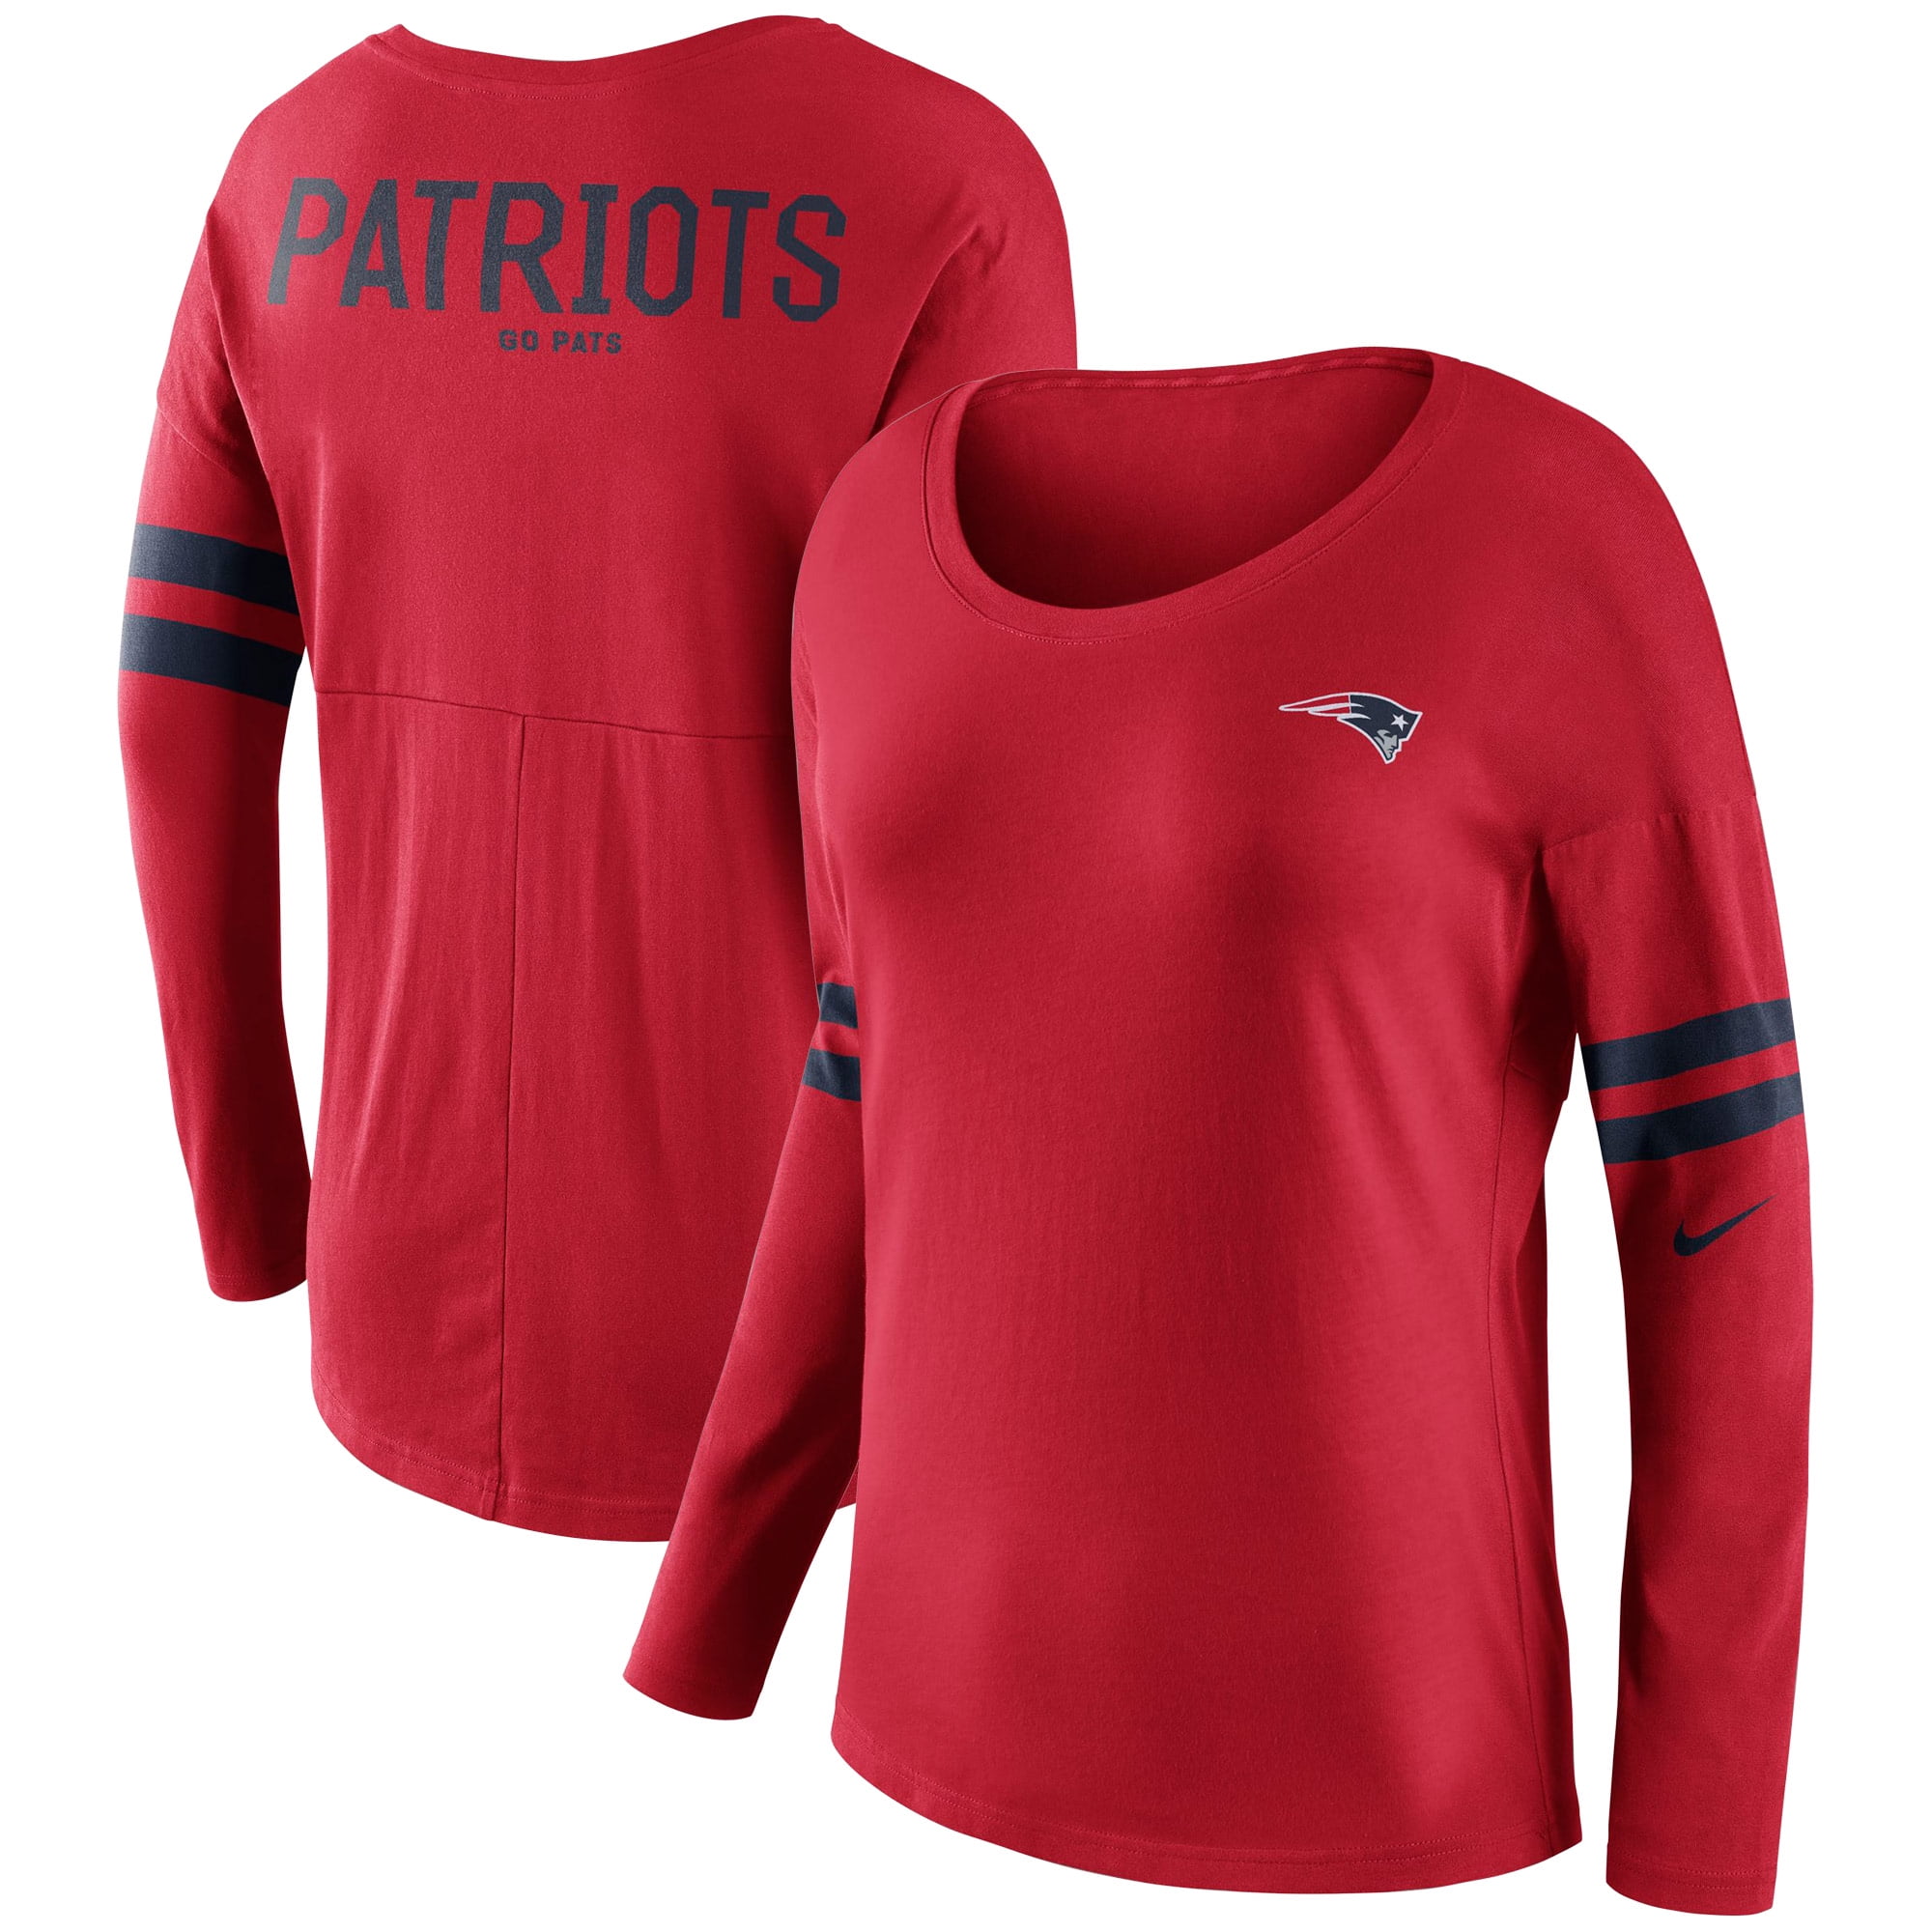 red new england patriots t shirt